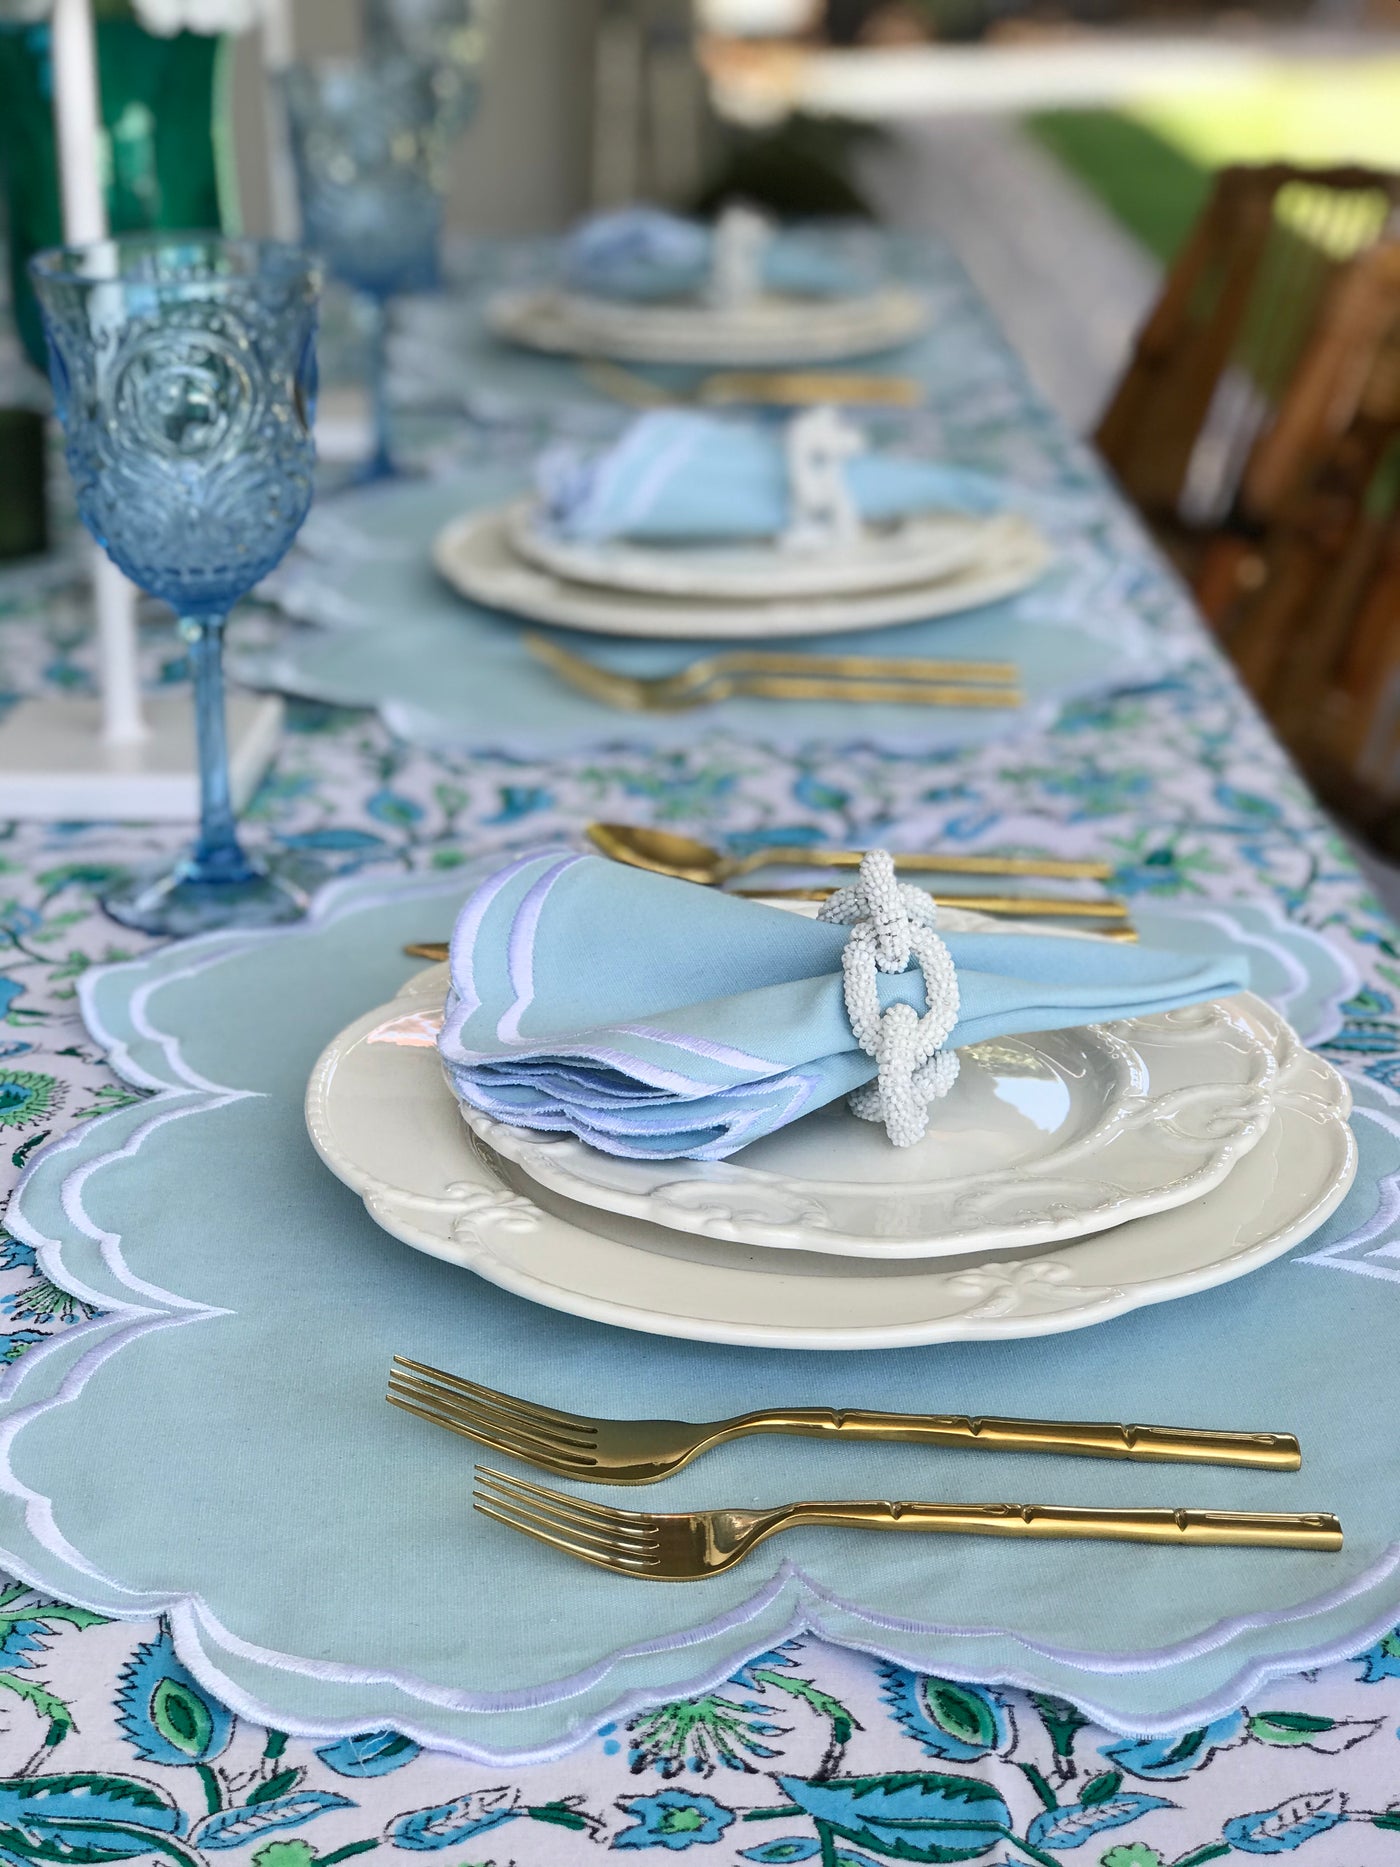 'High Tea' Placemat and Napkin Set - Pale Blue Scalloped